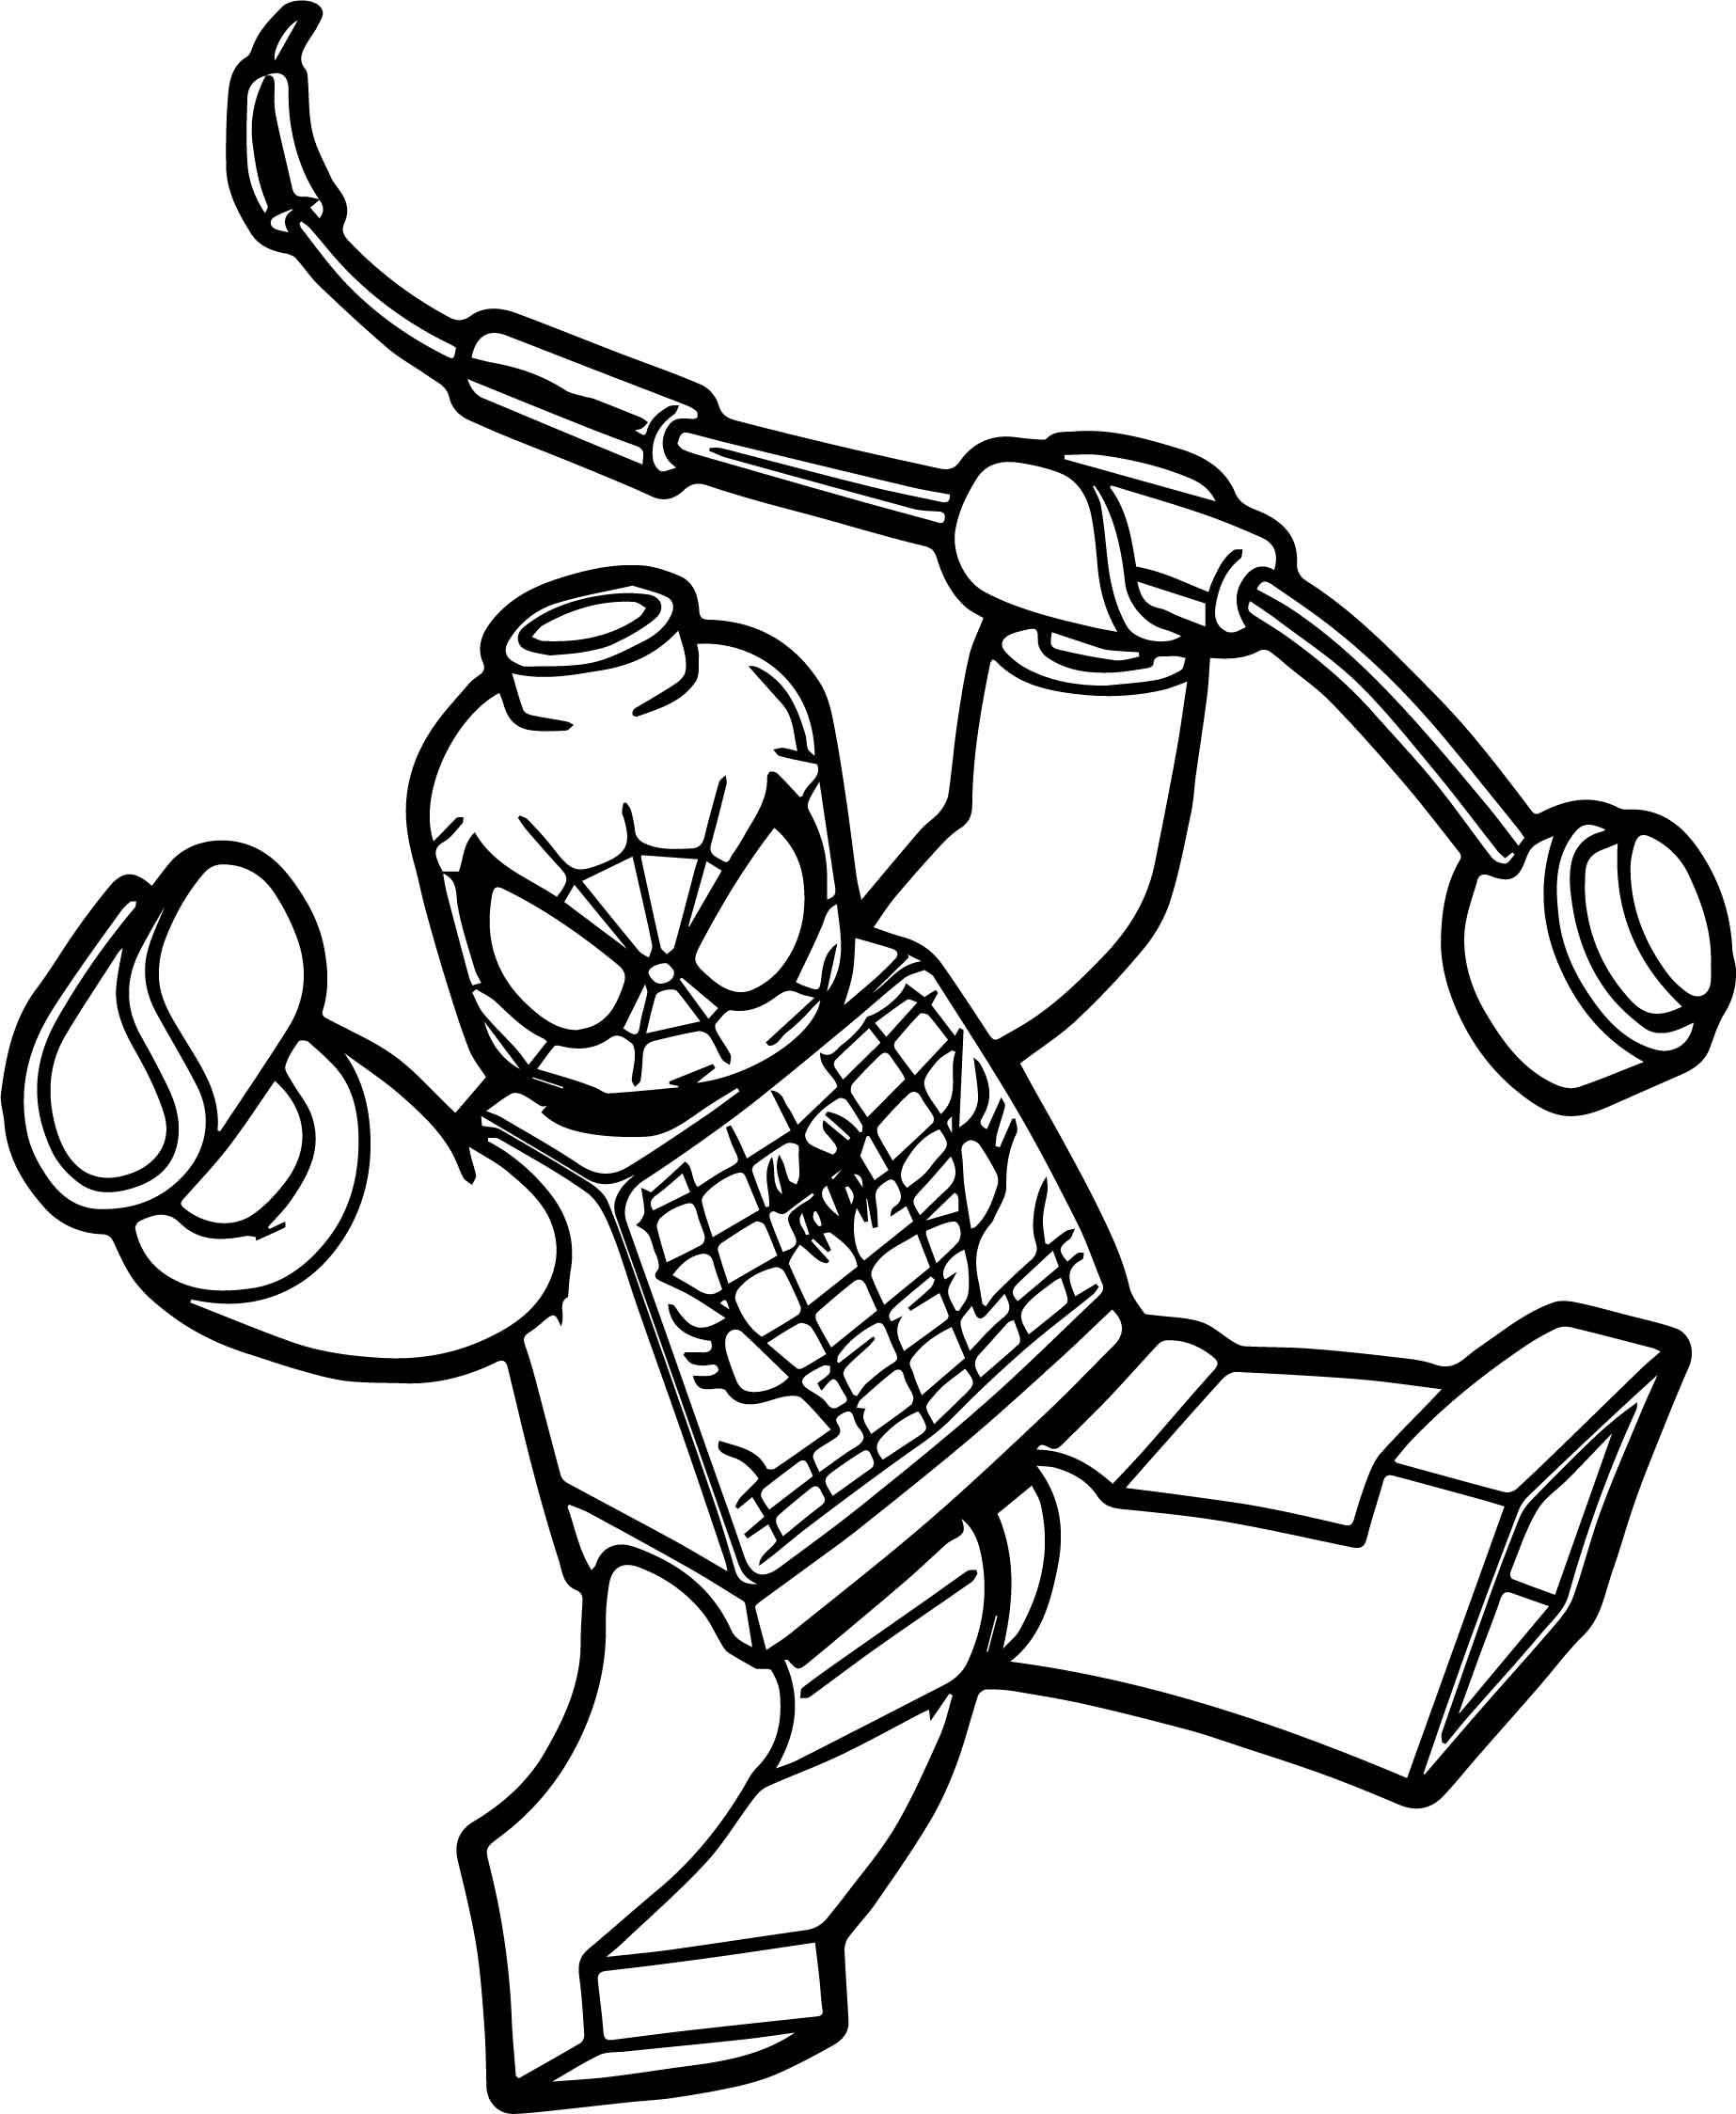 Spiderman Car Coloring Pages at GetDrawings | Free download